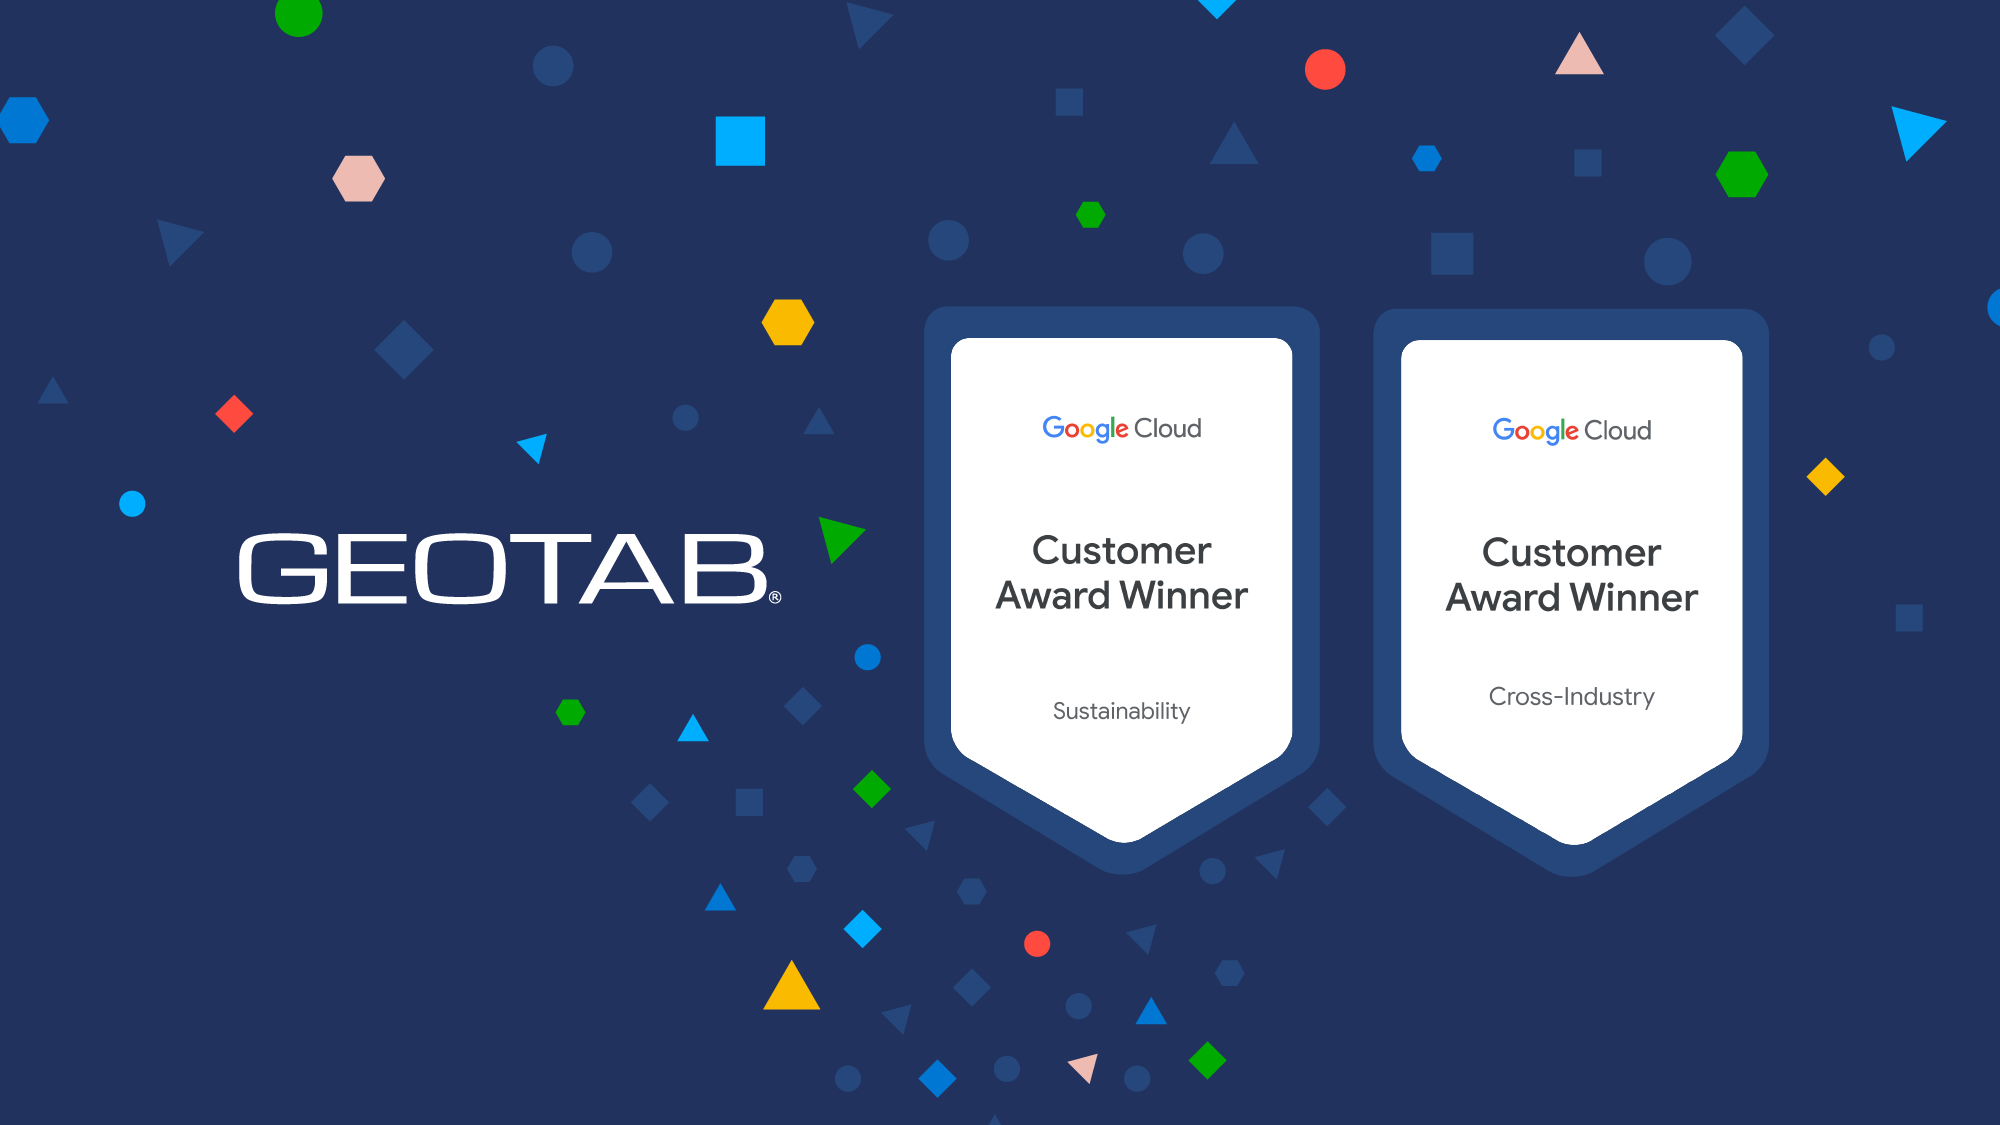 Geotab logo on dark blue background with confetti beside Google Cloud award badges for sustainability and cross-industry